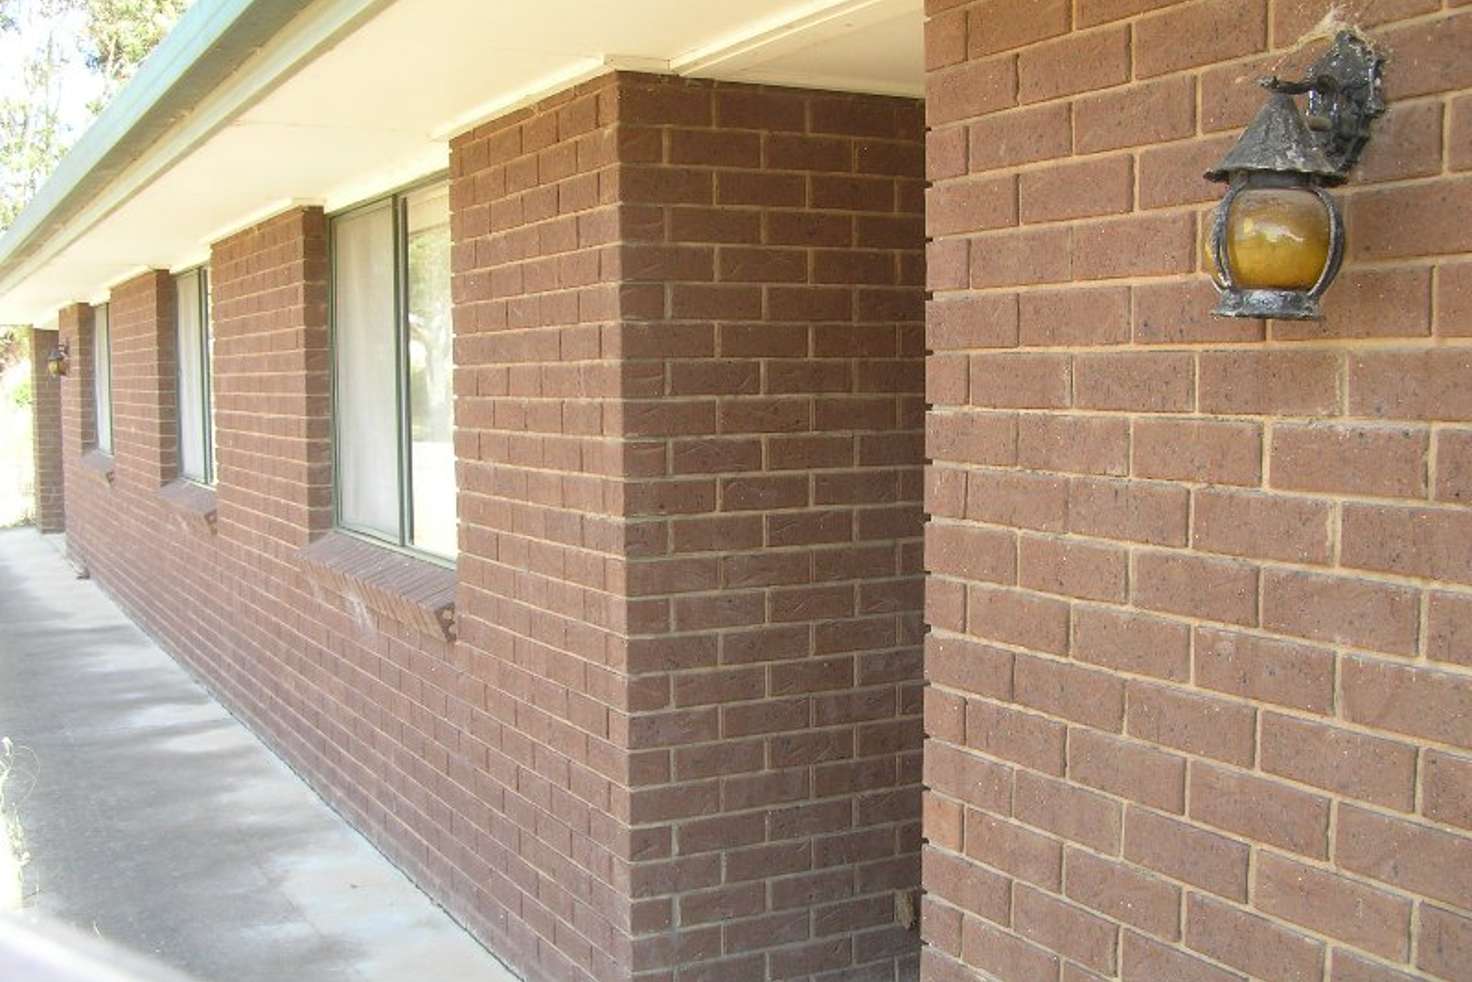 Main view of Homely house listing, 5 BOLTON, Jerilderie NSW 2716